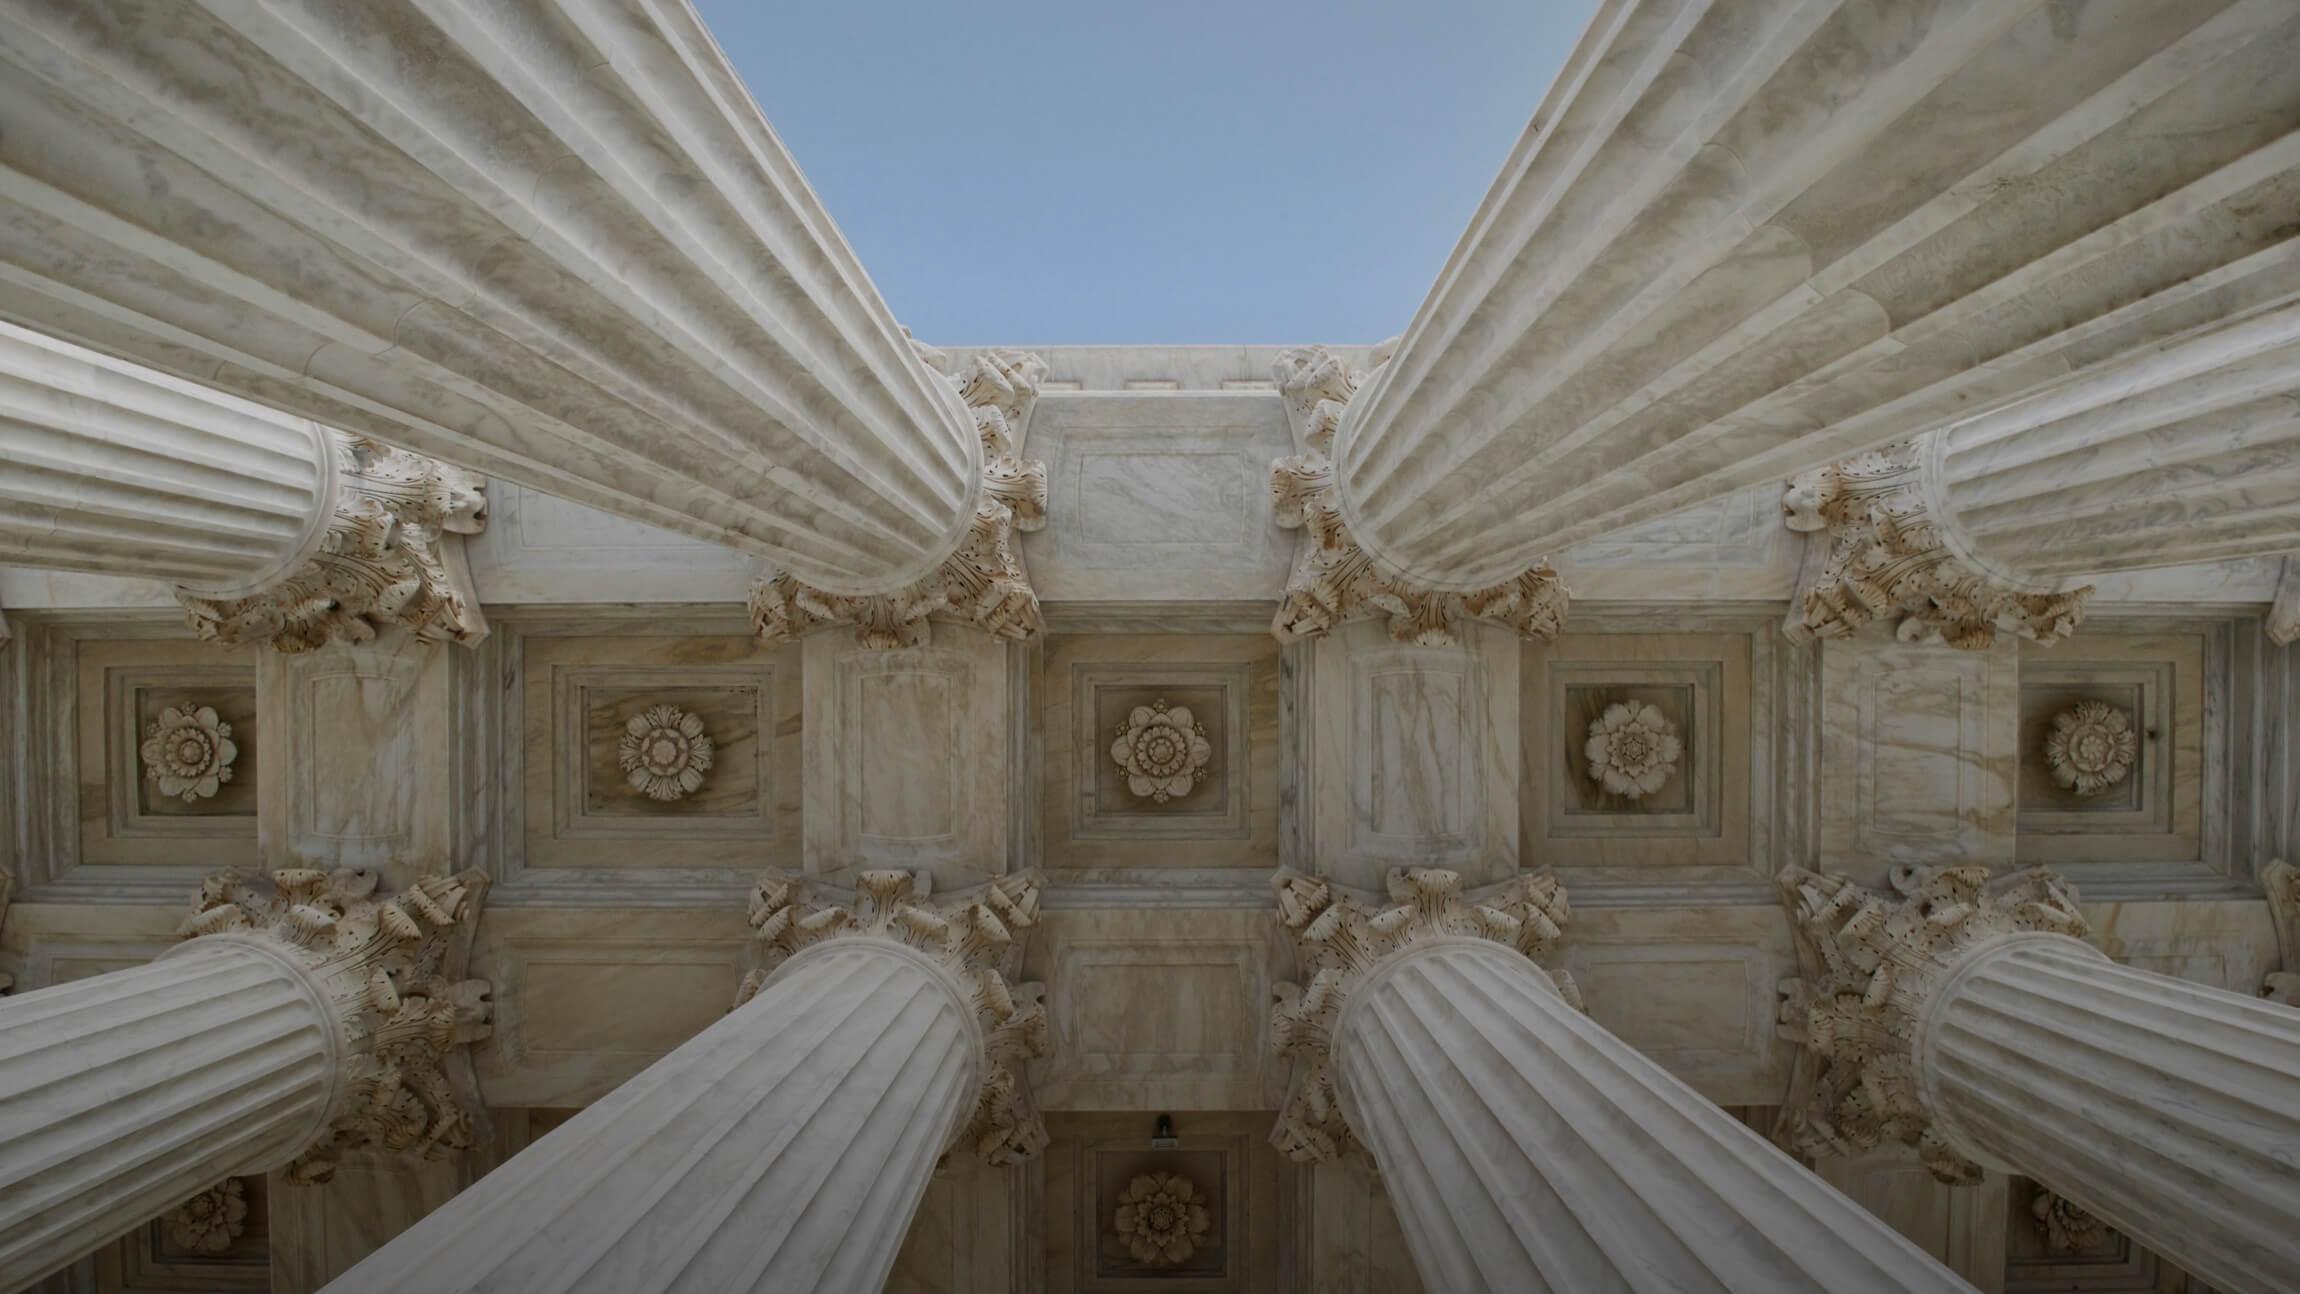 Photo of the pillars at the Supreme Court of the United States